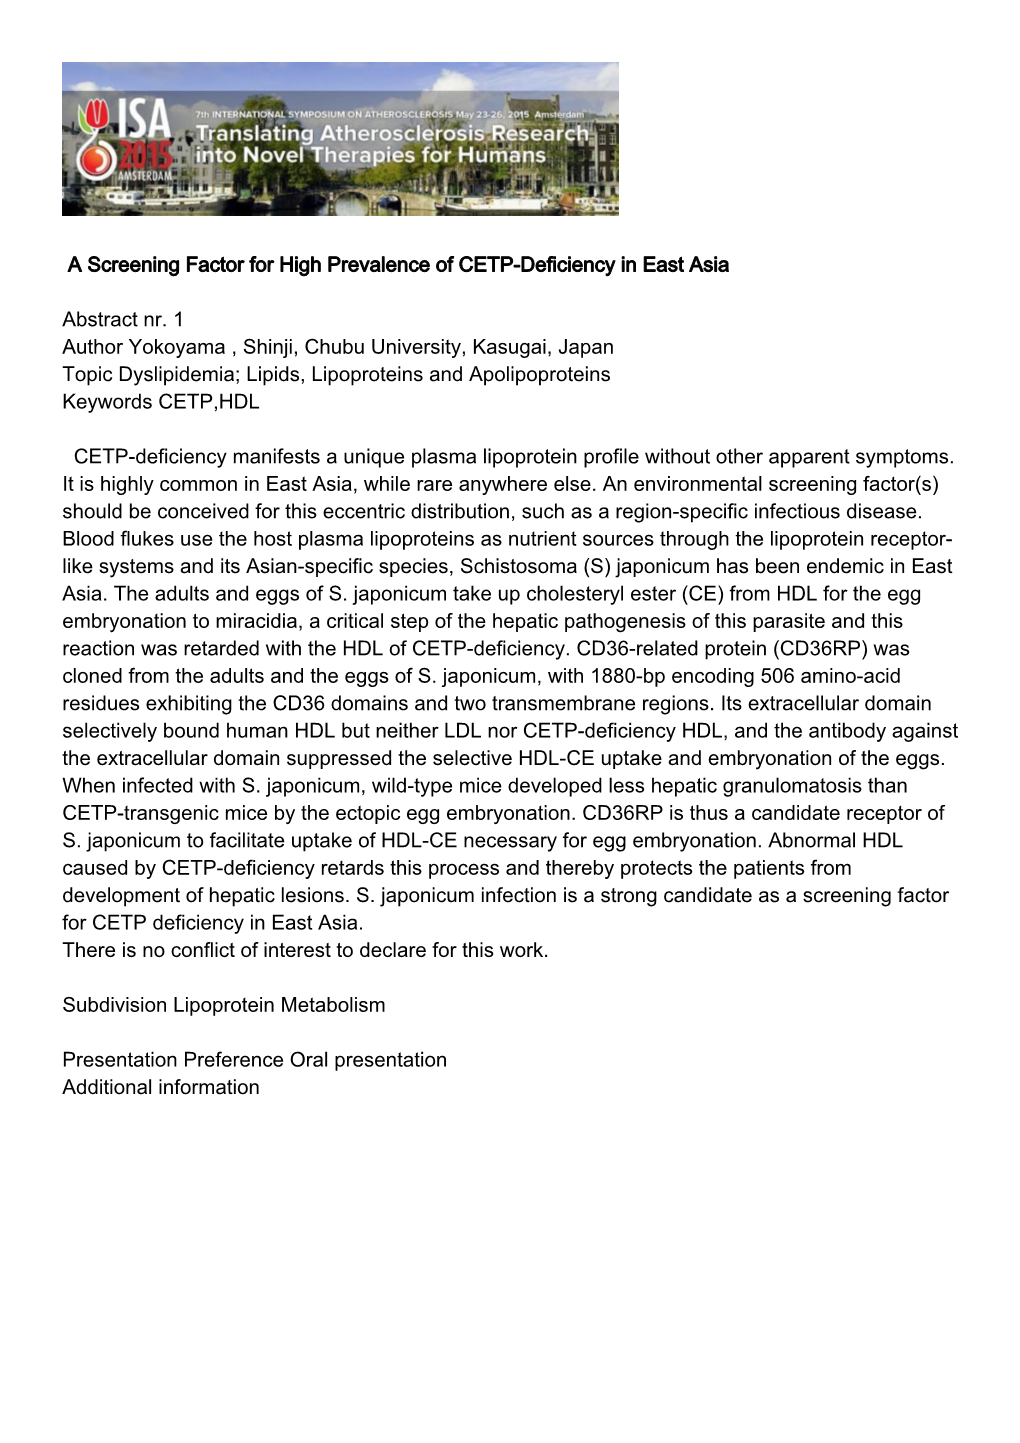 A Screening Factor for High Prevalence of CETP-Deficiency in East Asia